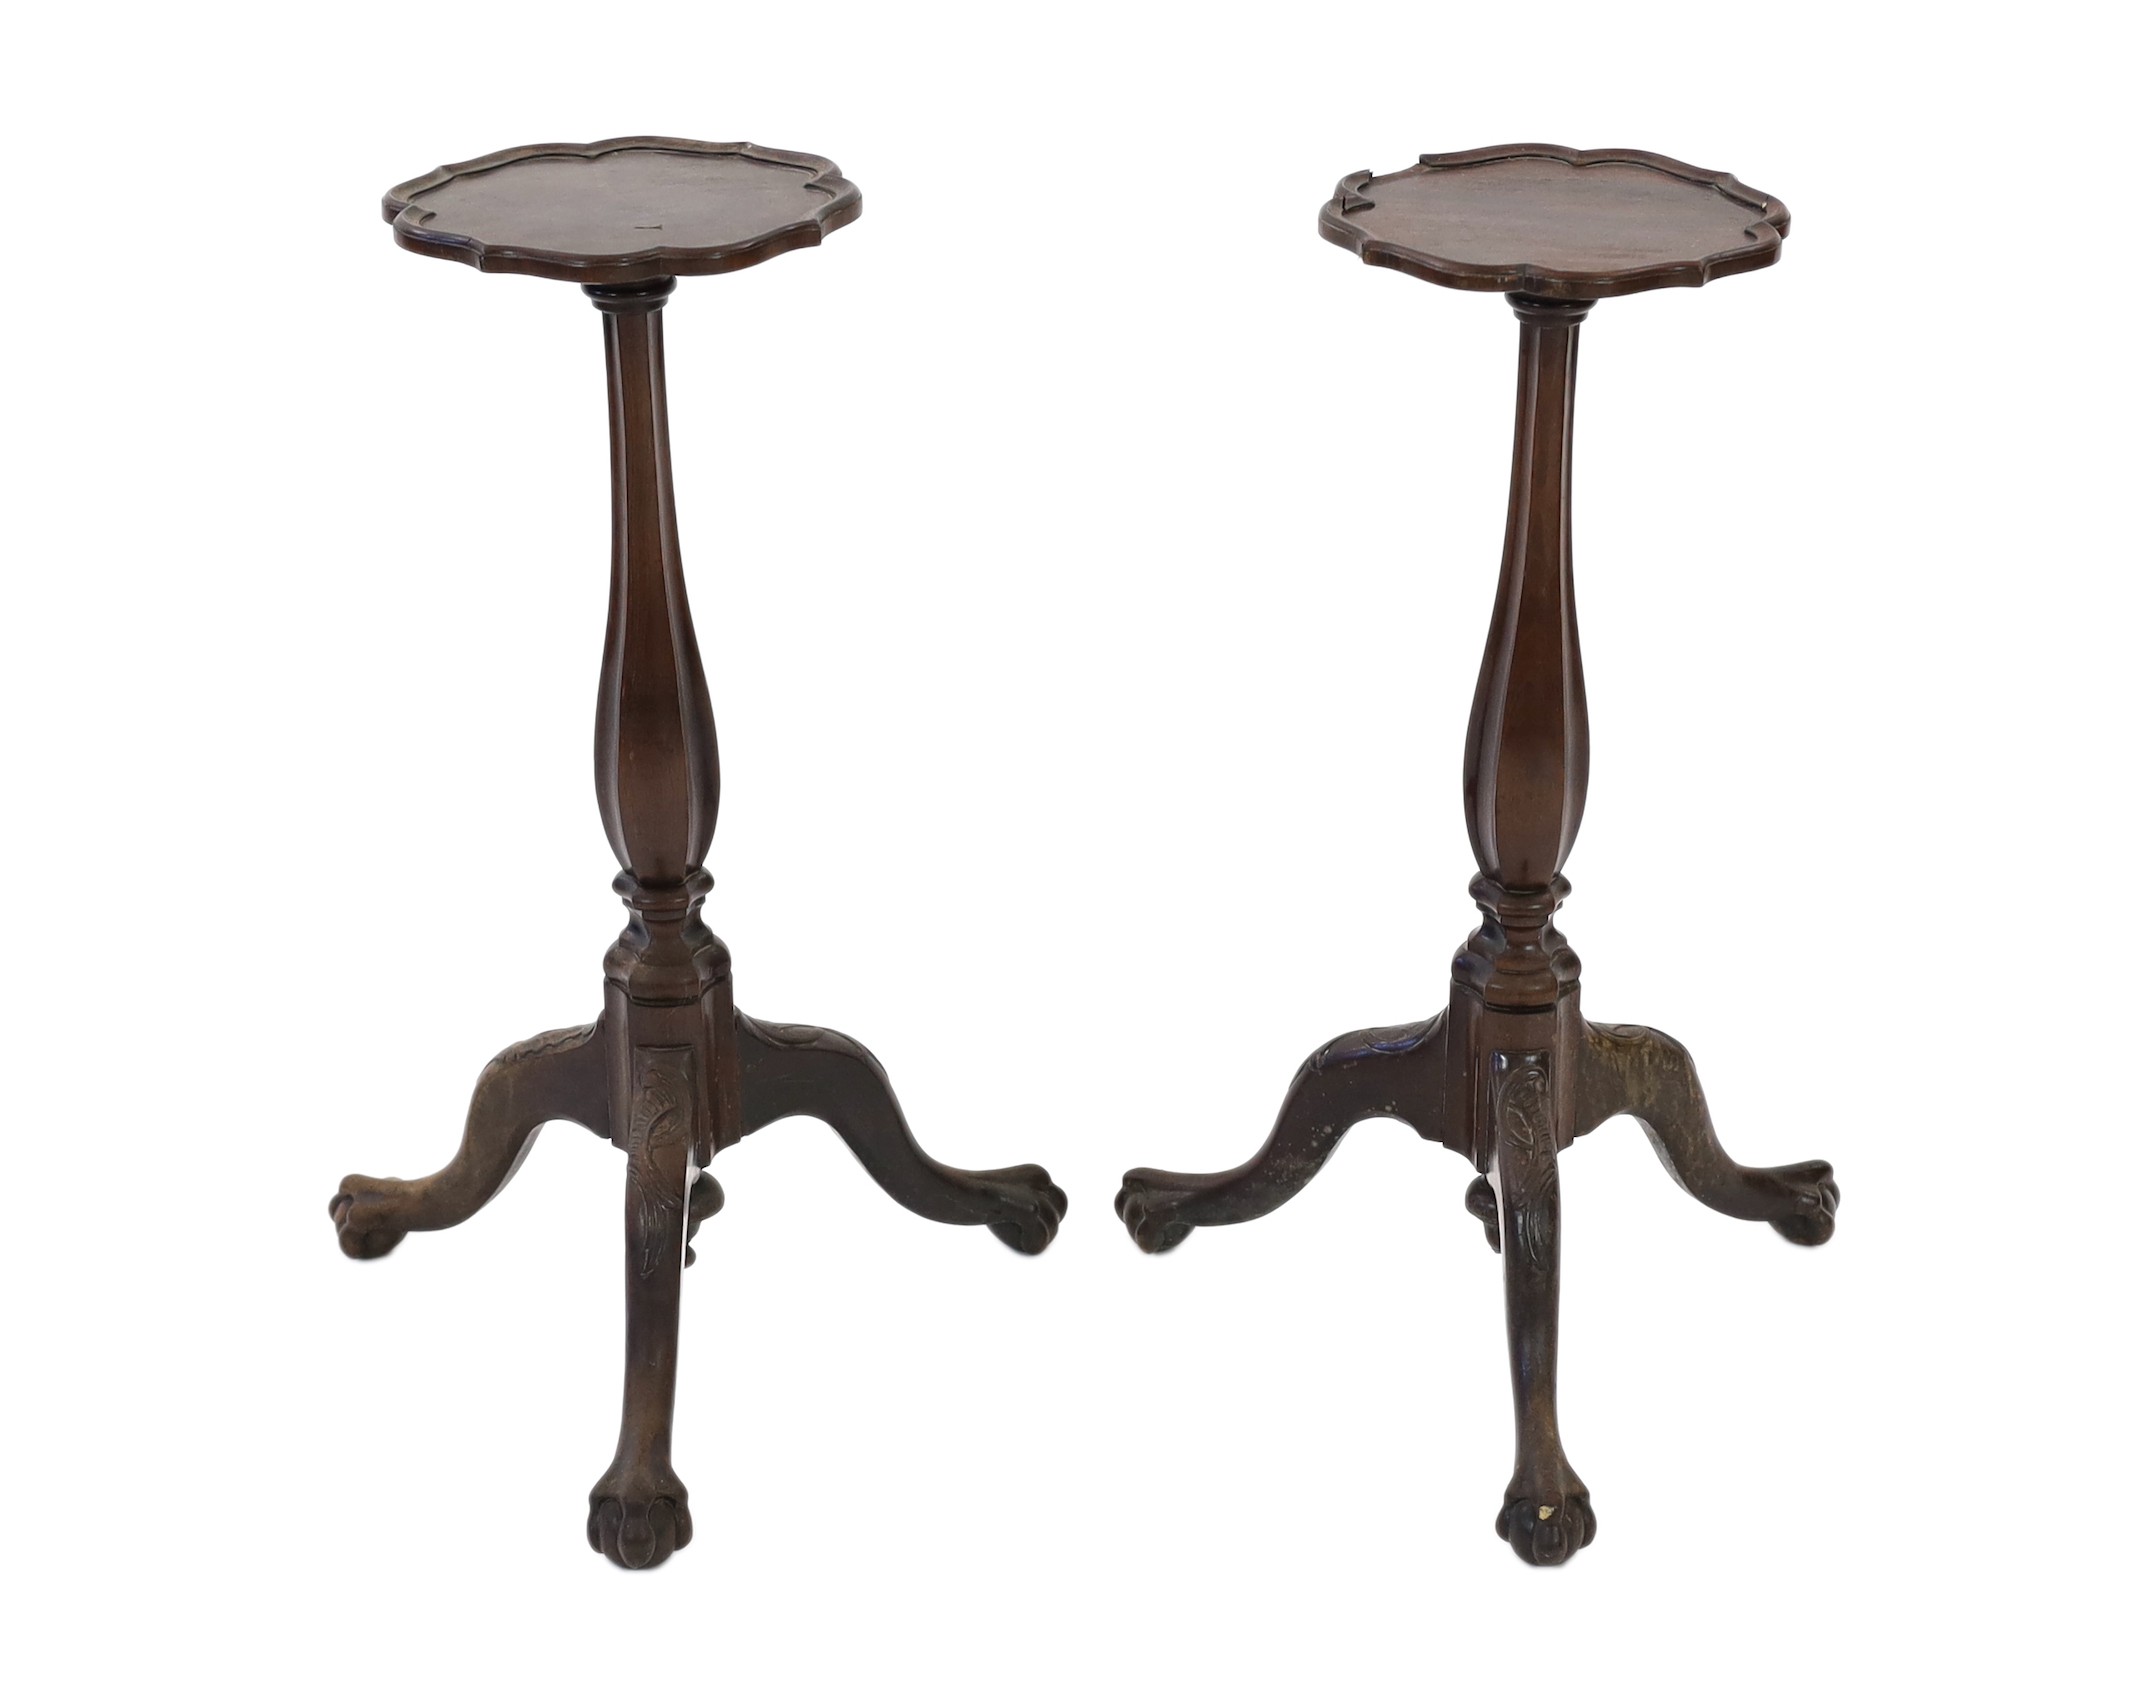 A pair of 18th century Dutch mahogany and oak torchere stands, with piecrust tops and fluted